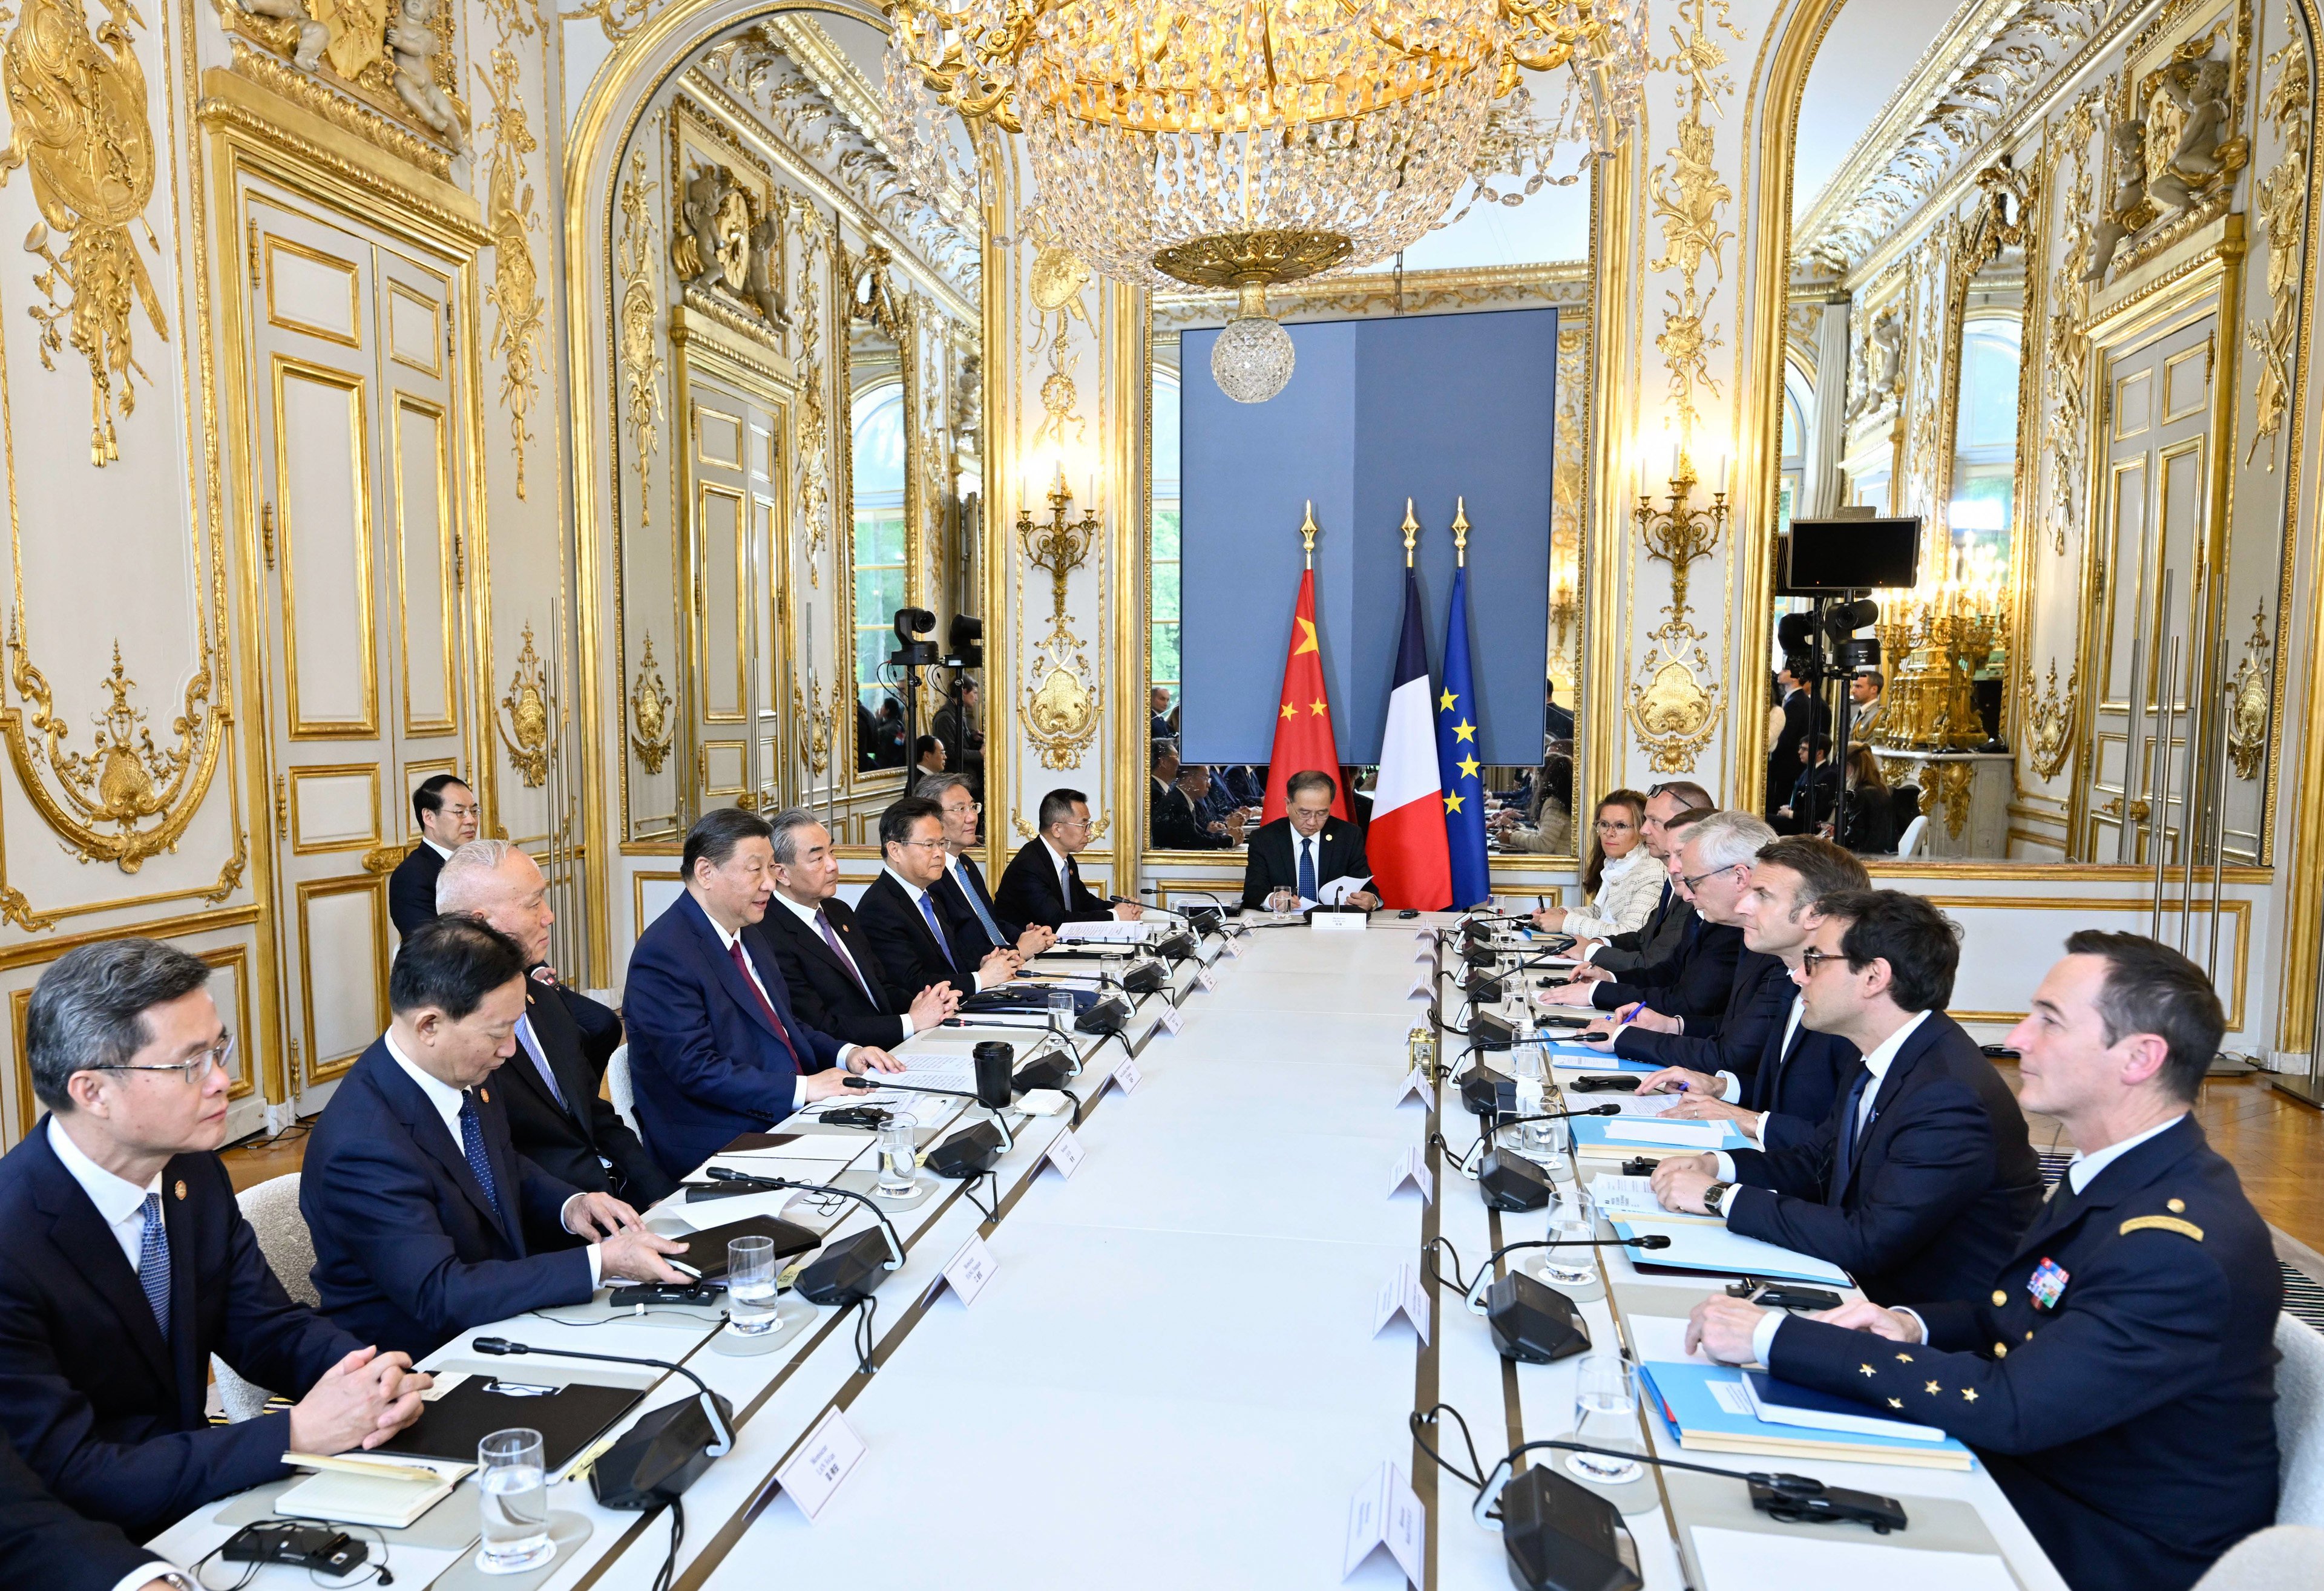 Chinese President Xi Jinping and his French counterpart, Emmanuel Macron, hold talks at the Elysee Palace  in Paris on Monday. Photo: Xinhua